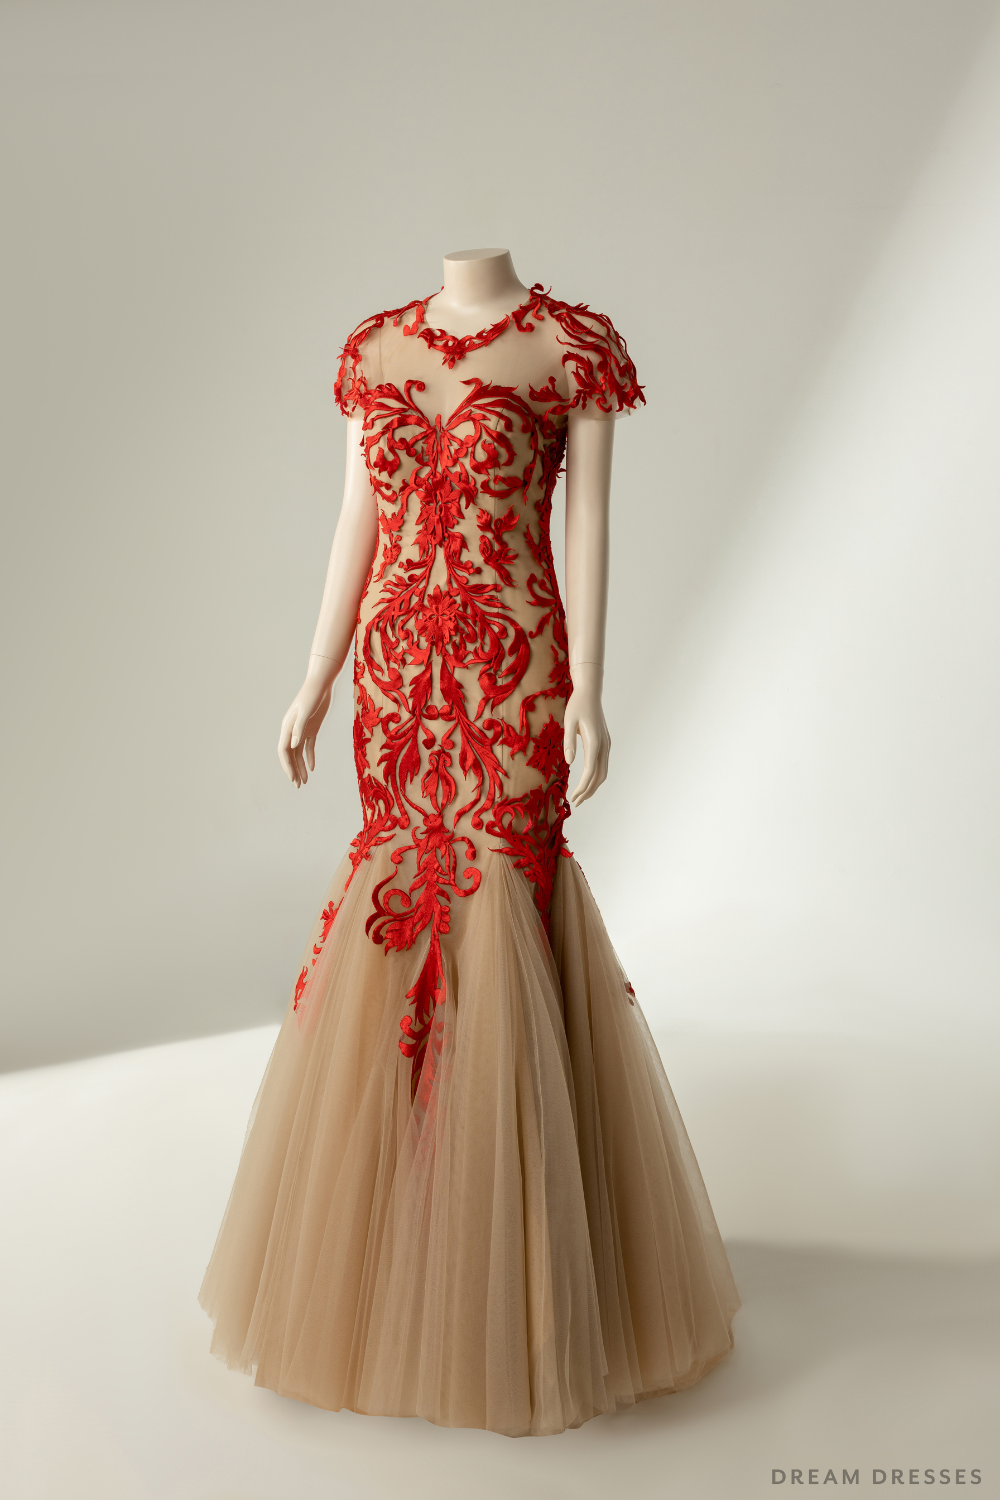 Couture Red Mermaid Wedding Gown with Embroidery (#ERINA)